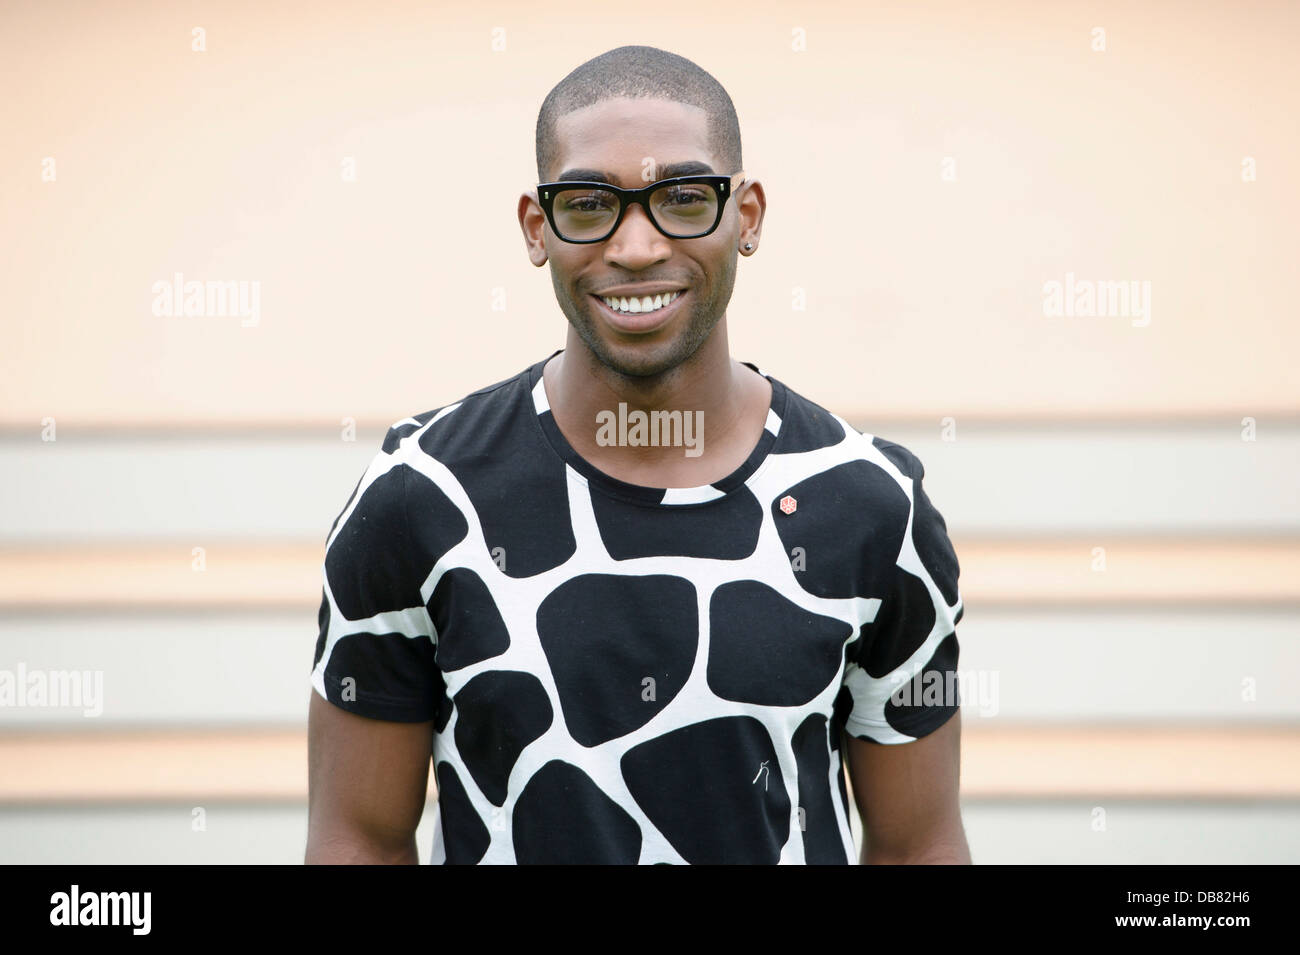 Tinie Tempah arrives for Burberry Prorsum during London Men's spring summer fashion collections 2014, in London. Stock Photo